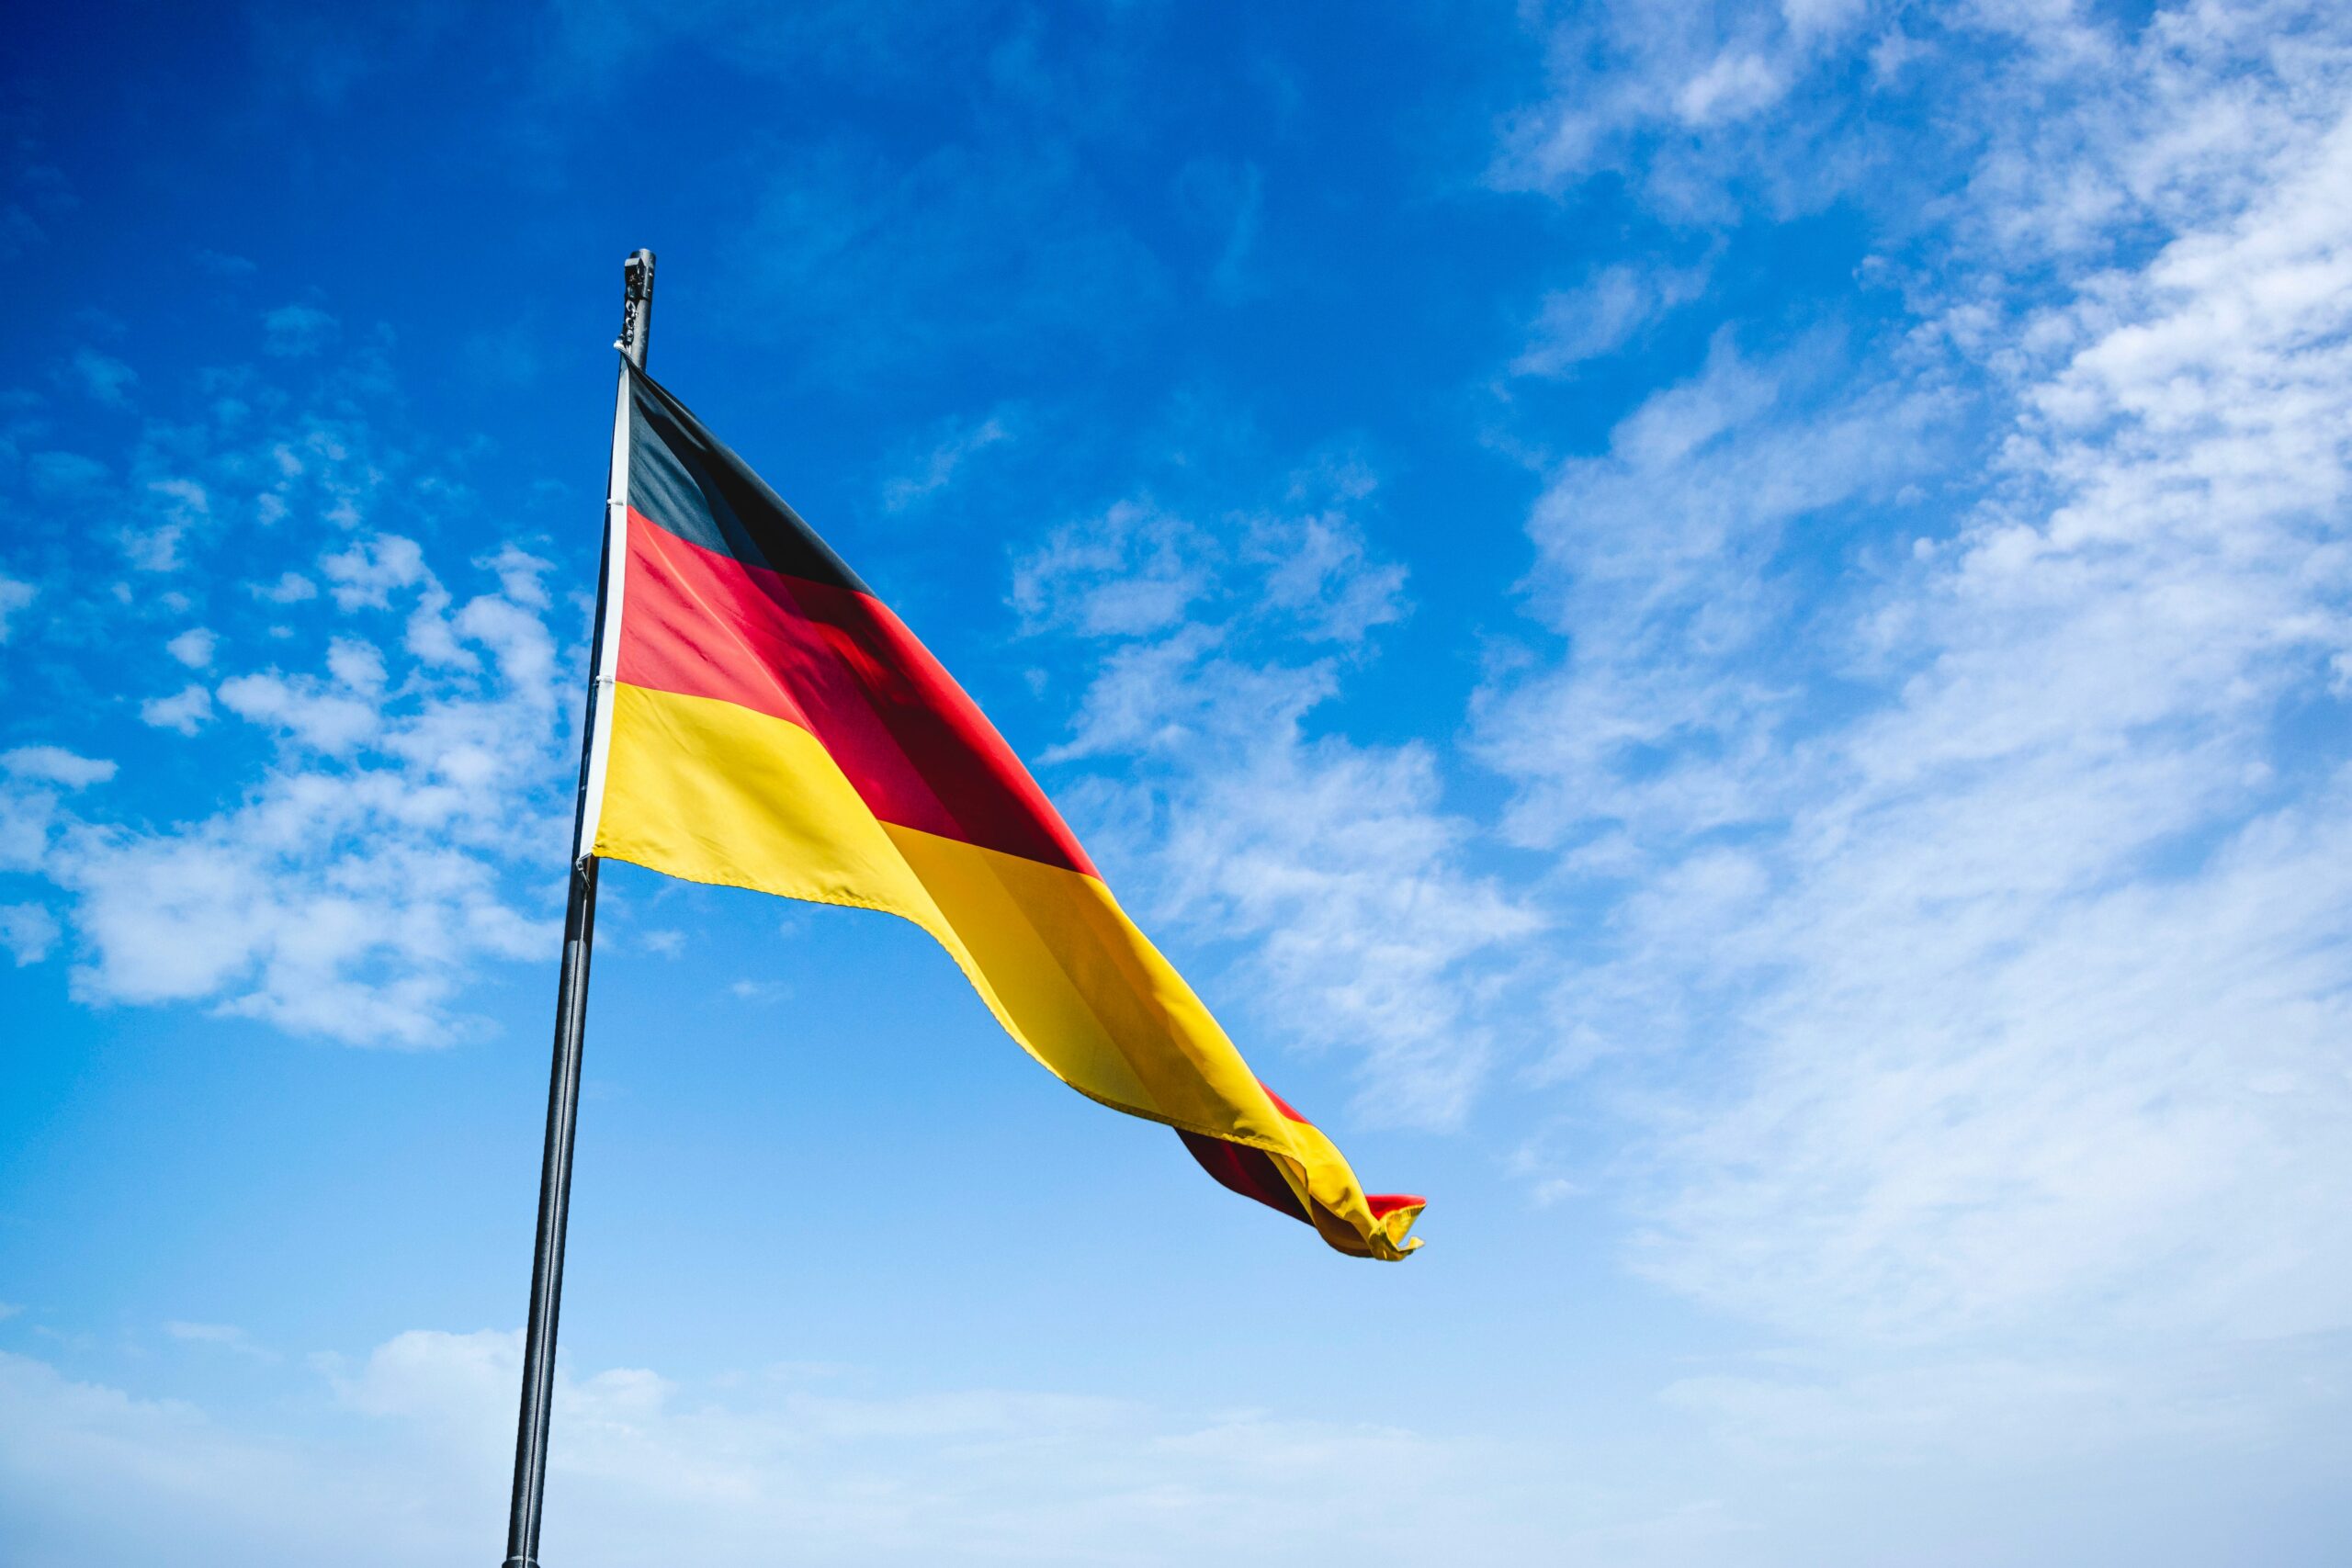 A Deutschland flag waving in the air on a flagpole.